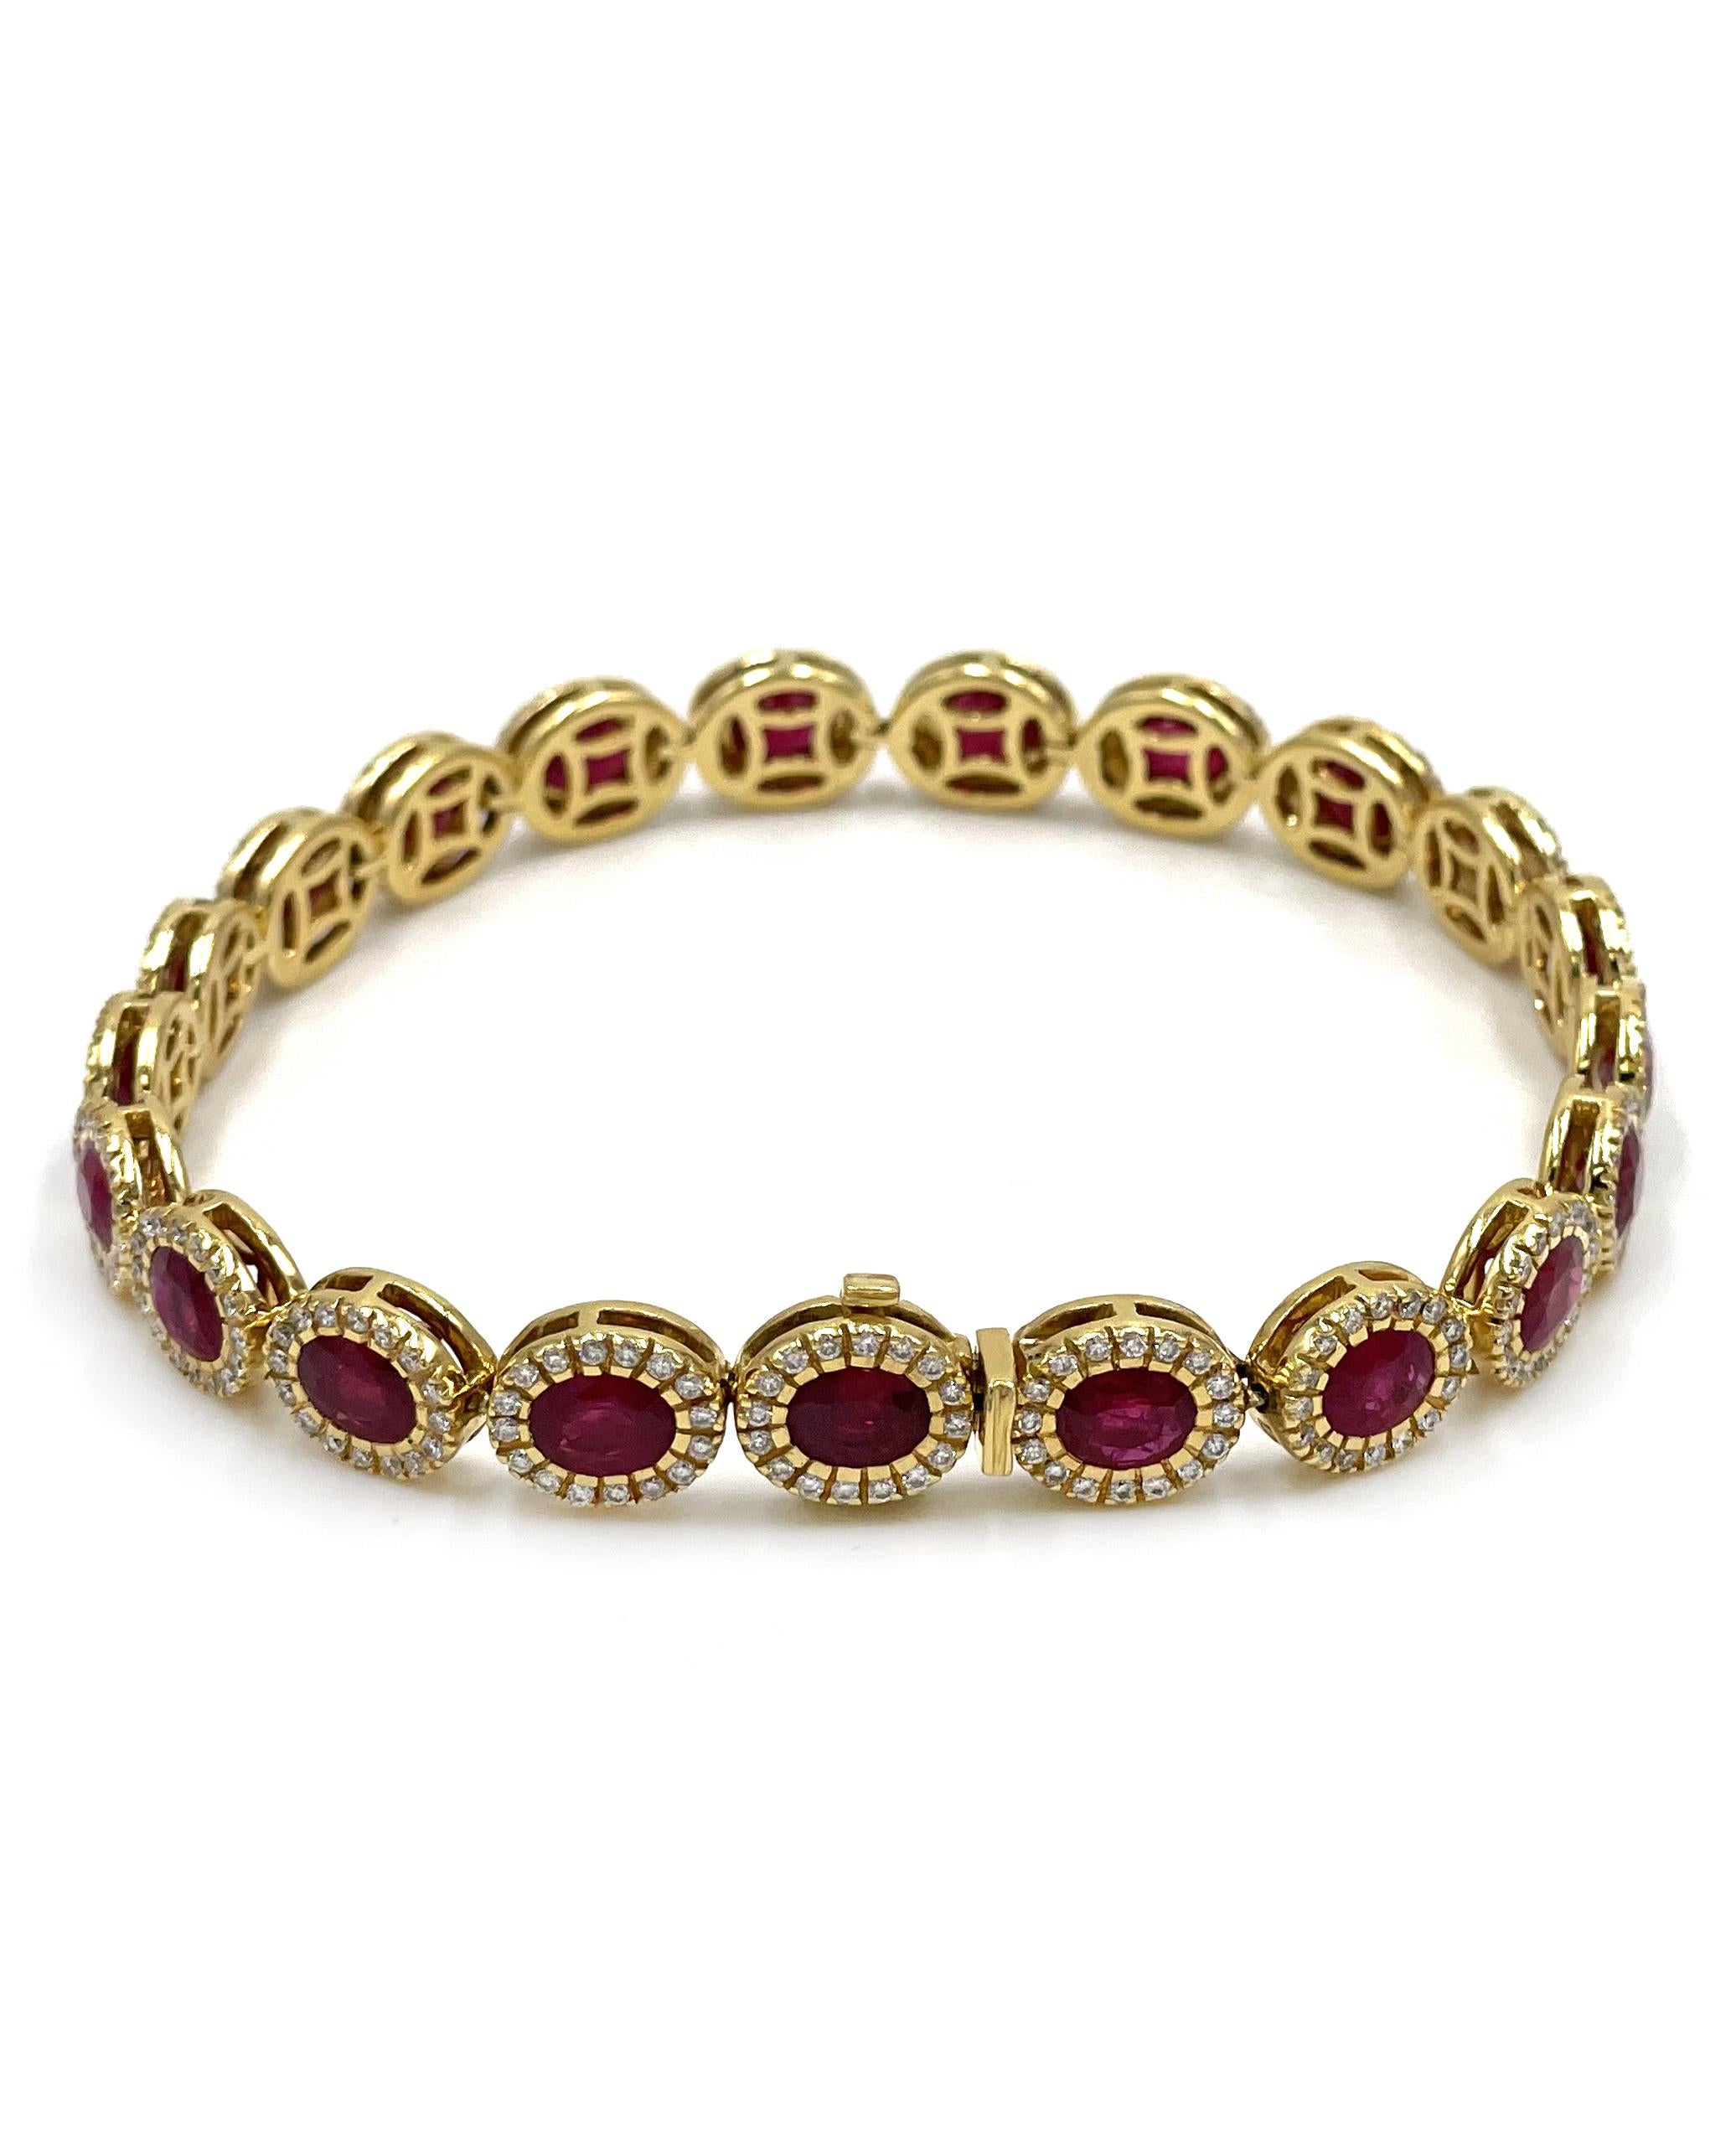 Ruby and diamond bracelet set in 18K yellow gold.  The bracelet features 21 oval cut rubies weighing 10.21 carats and 336 bround brillliant-cut diamonds weighing a total weight of 1.36 carats.

* Diamonds are on average G color, VS2/SI1 clarity
*